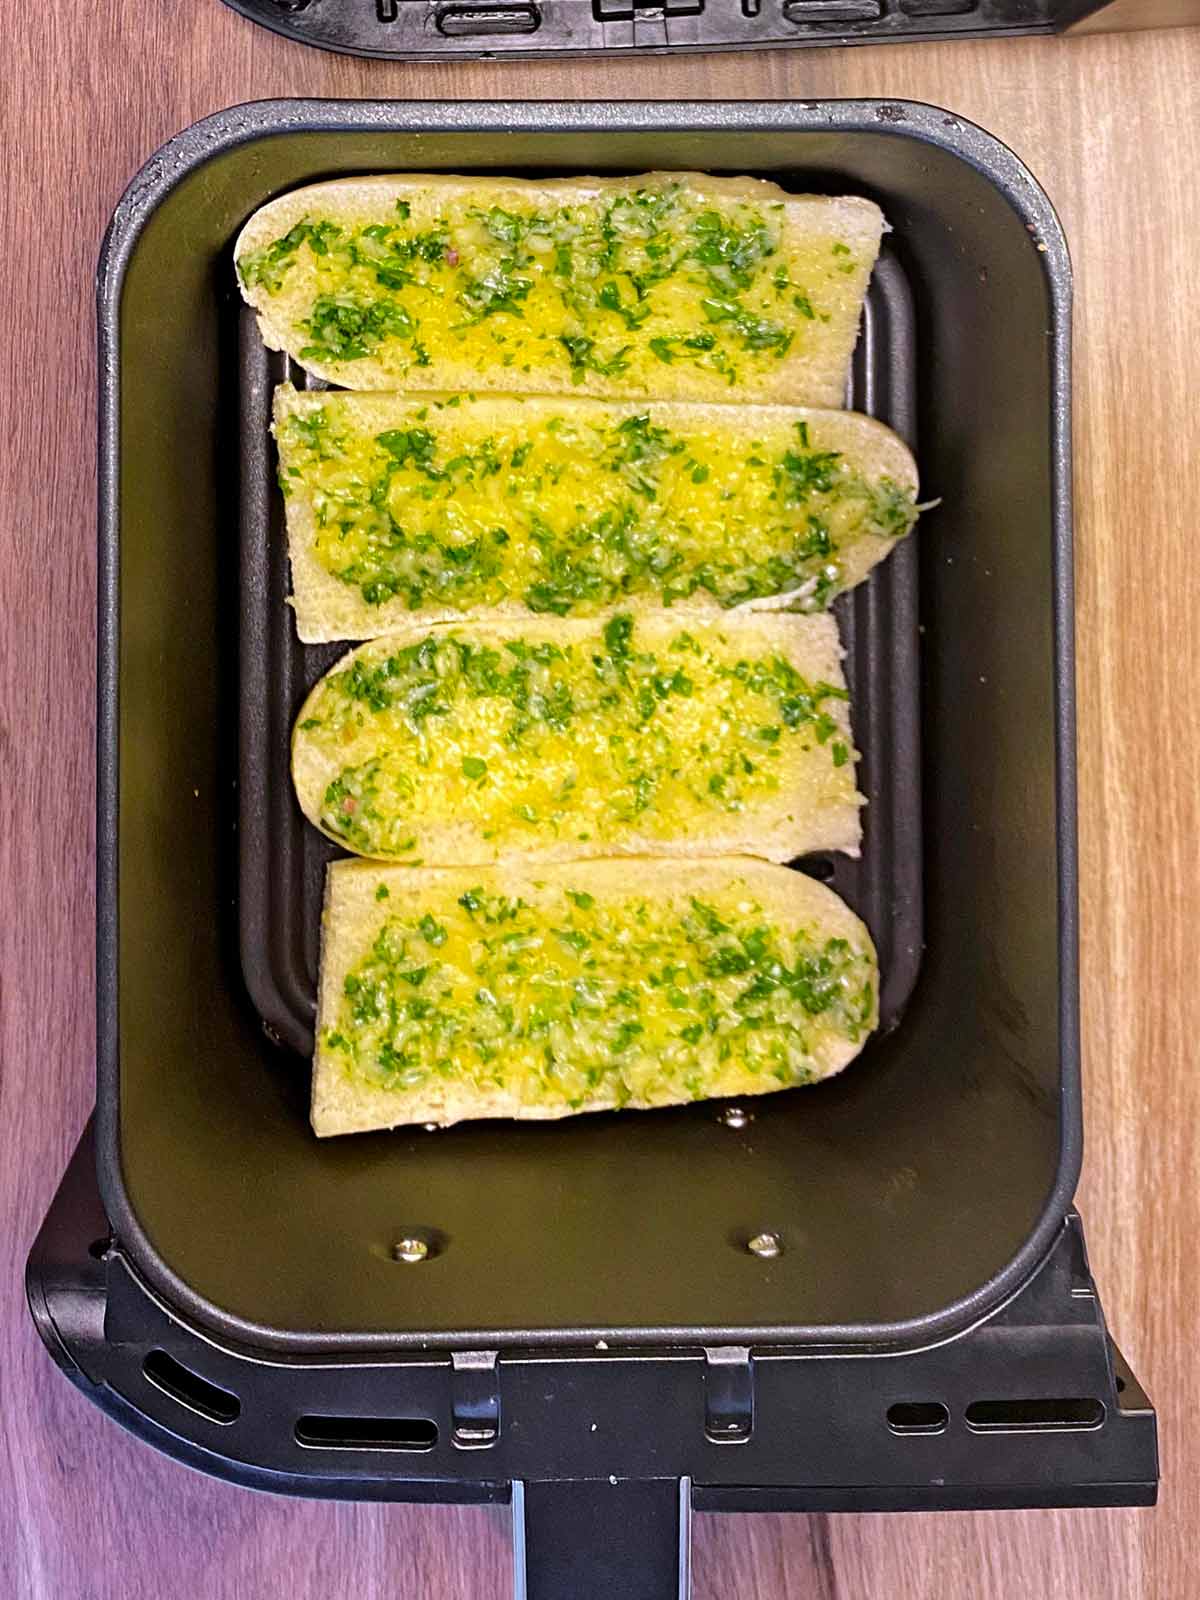 Four slices of uncooked garlic bread in an air fryer basket.